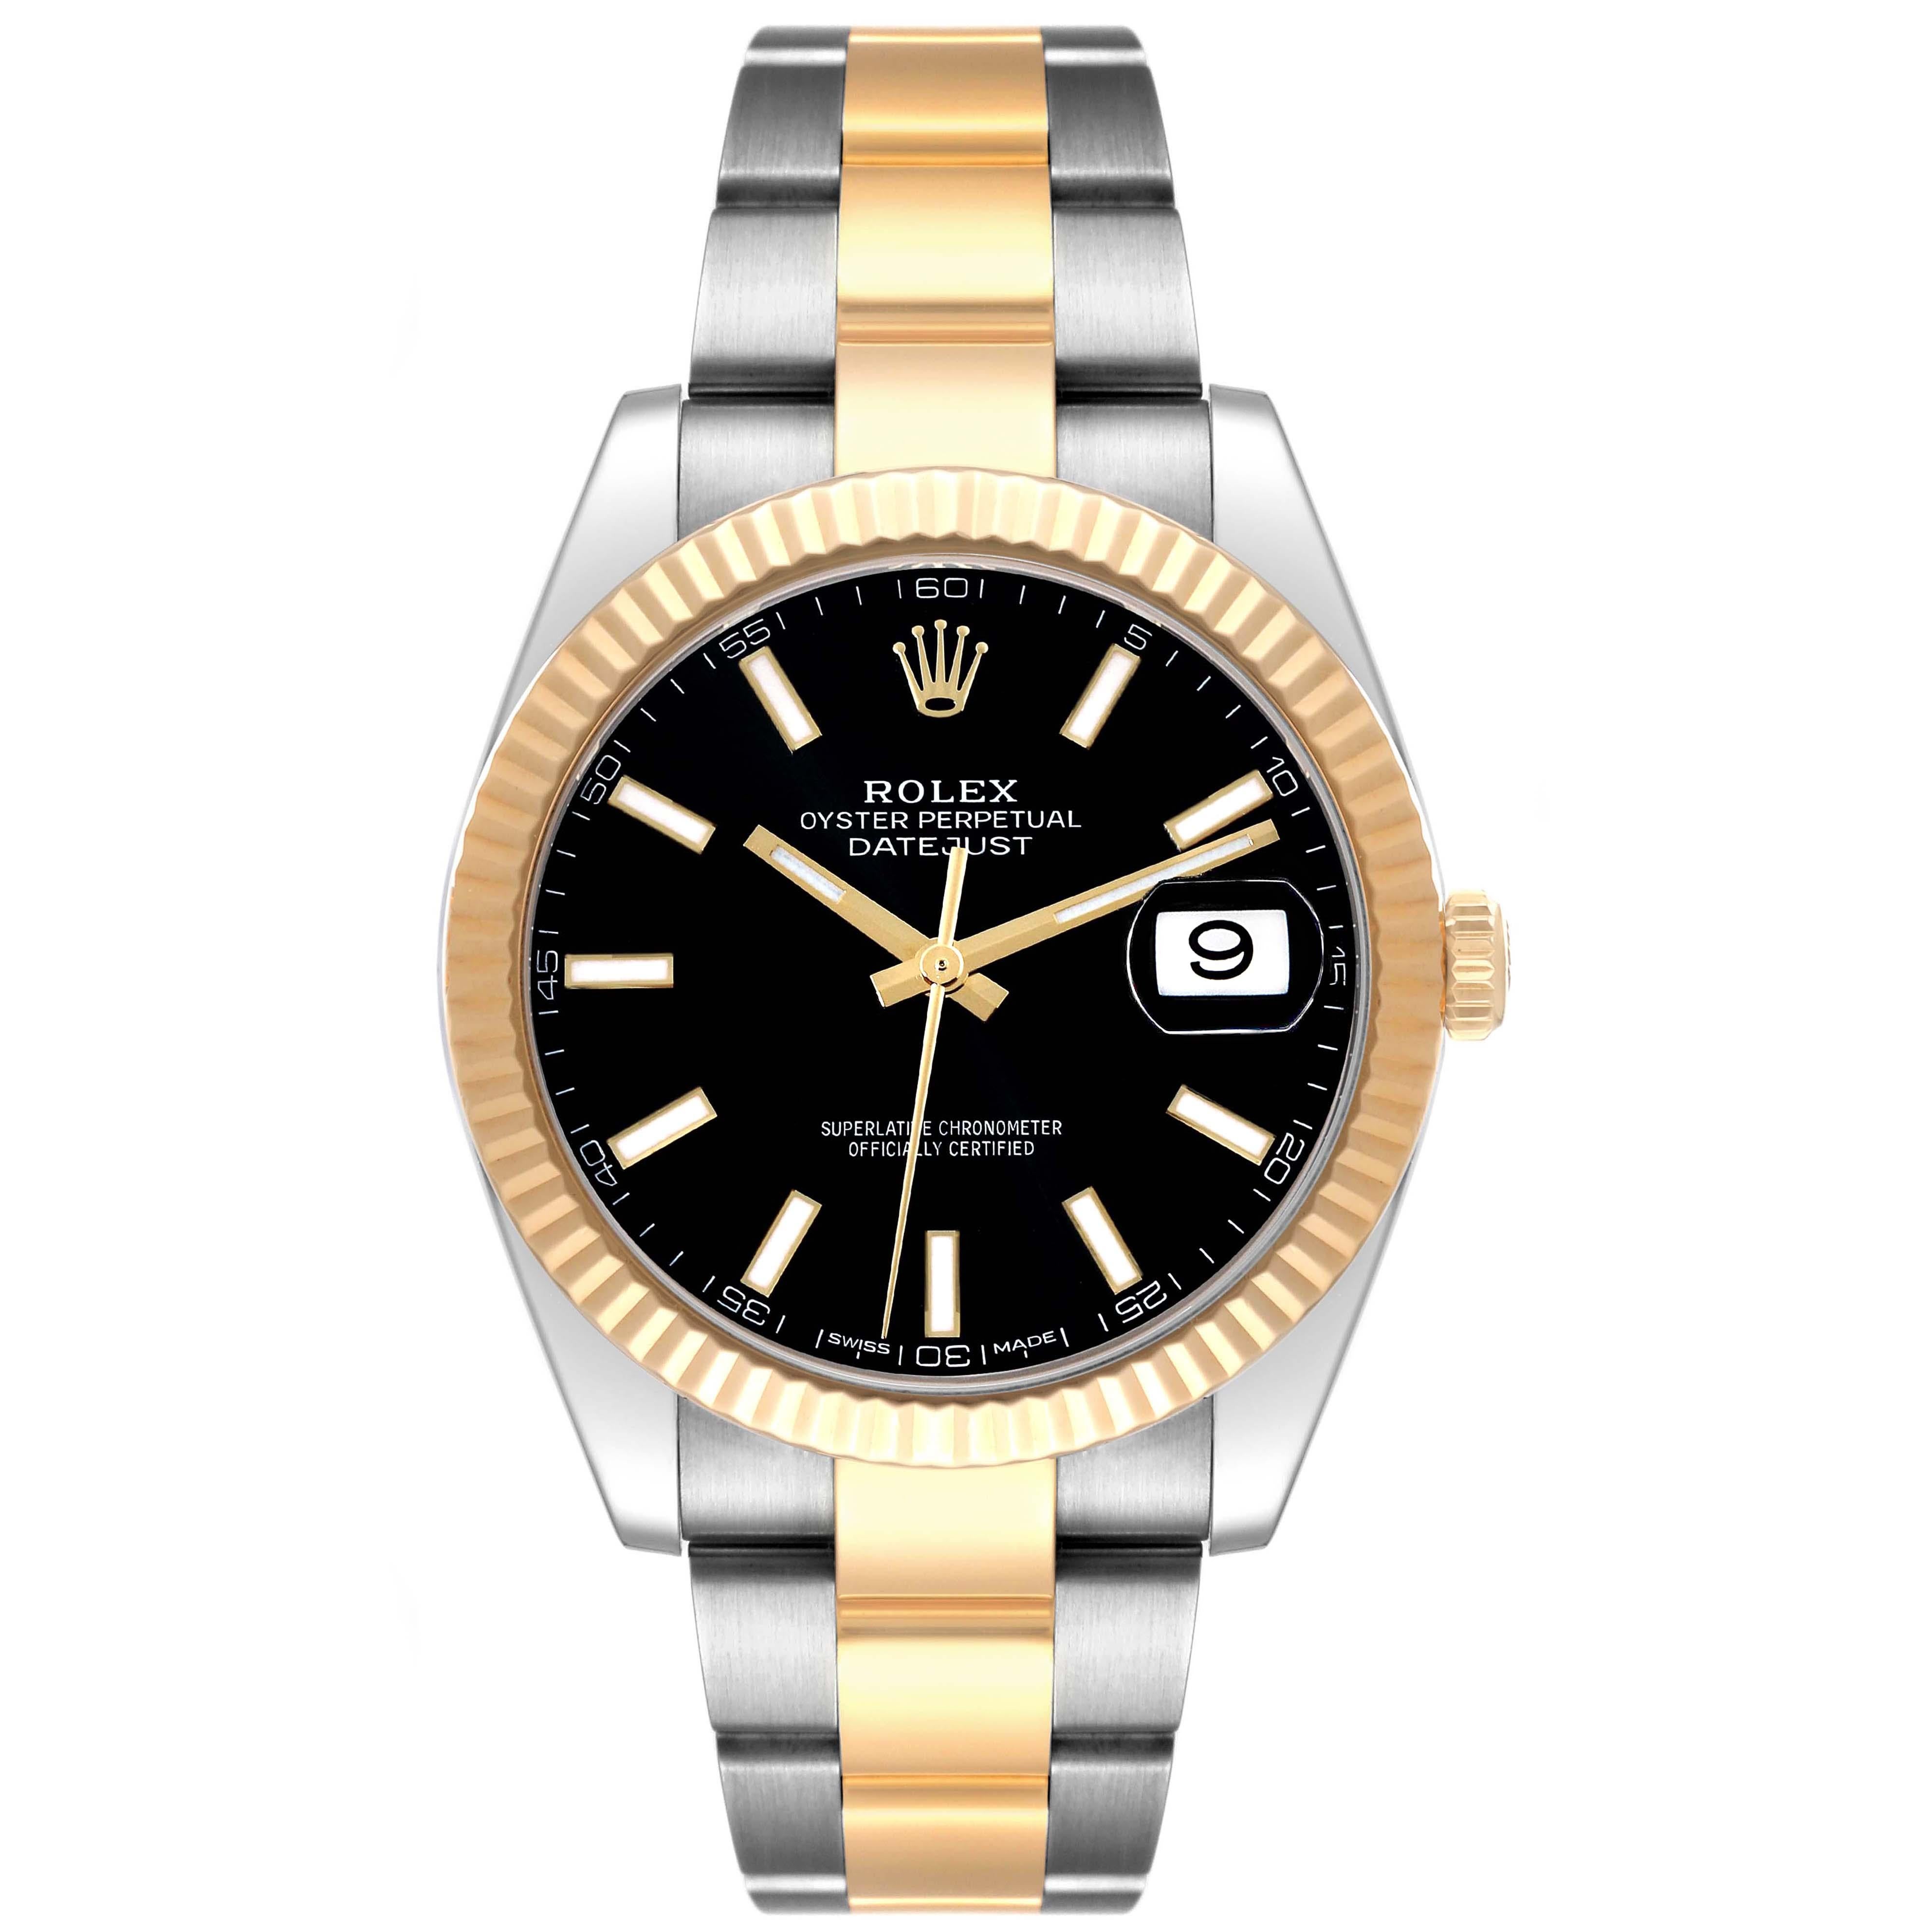 Rolex Datejust 41 Steel Yellow Gold Black Dial Mens Watch 126333. Officially certified chronometer automatic self-winding movement. Stainless steel and 18K yellow gold case 41.0 mm in diameter. Rolex logo on the crown. 18K yellow gold fluted bezel.